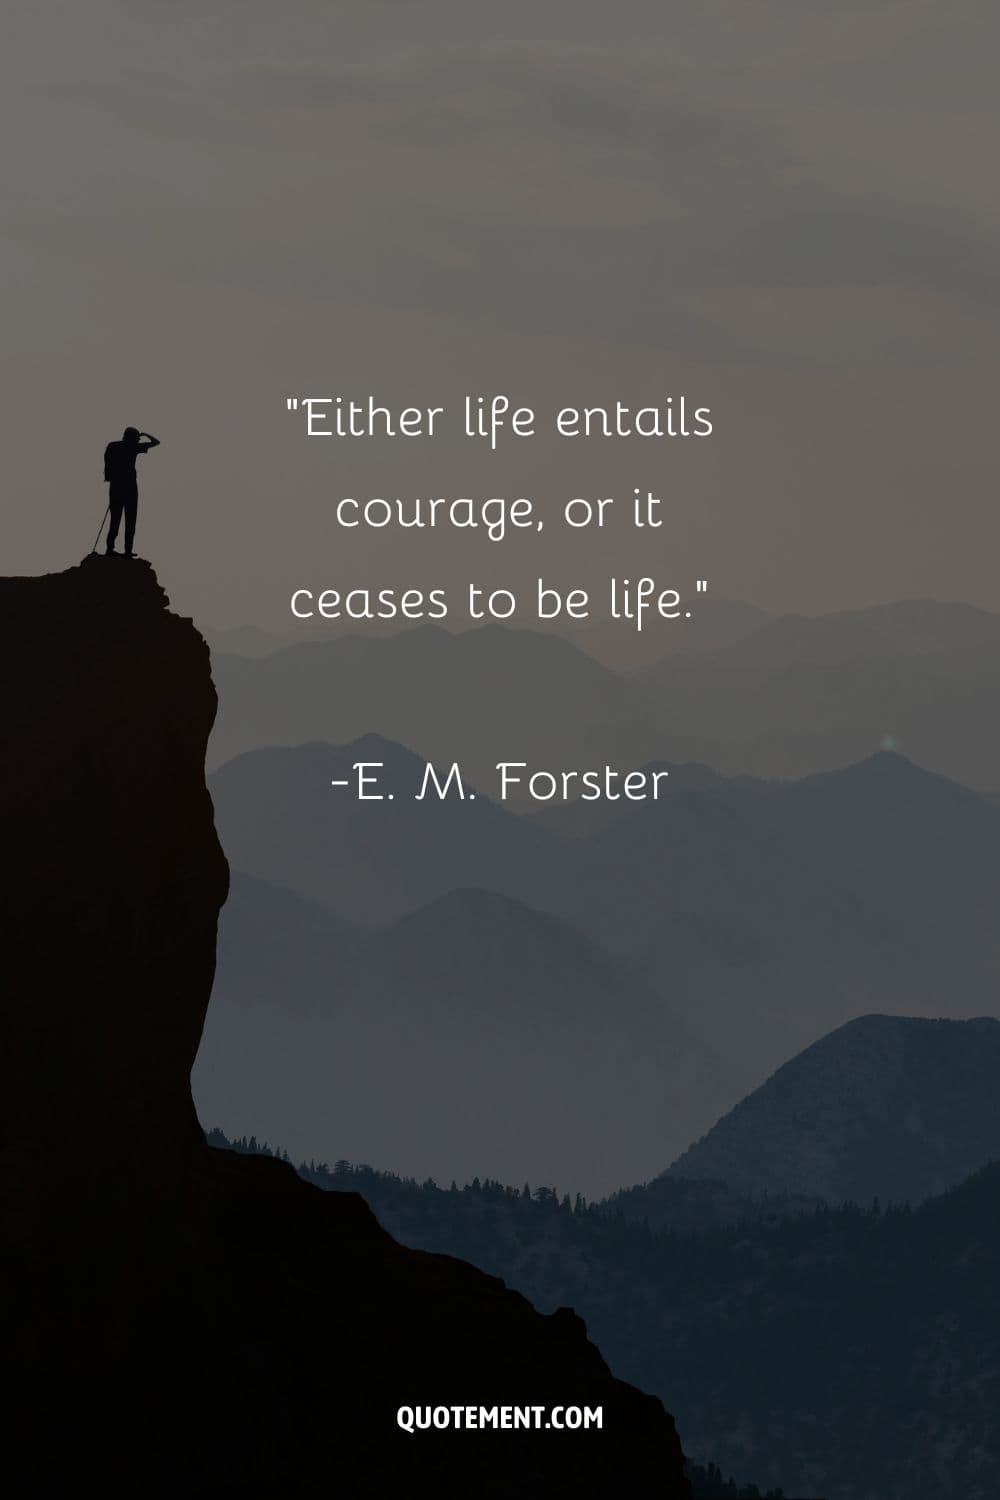 Either life entails courage, or it ceases to be life